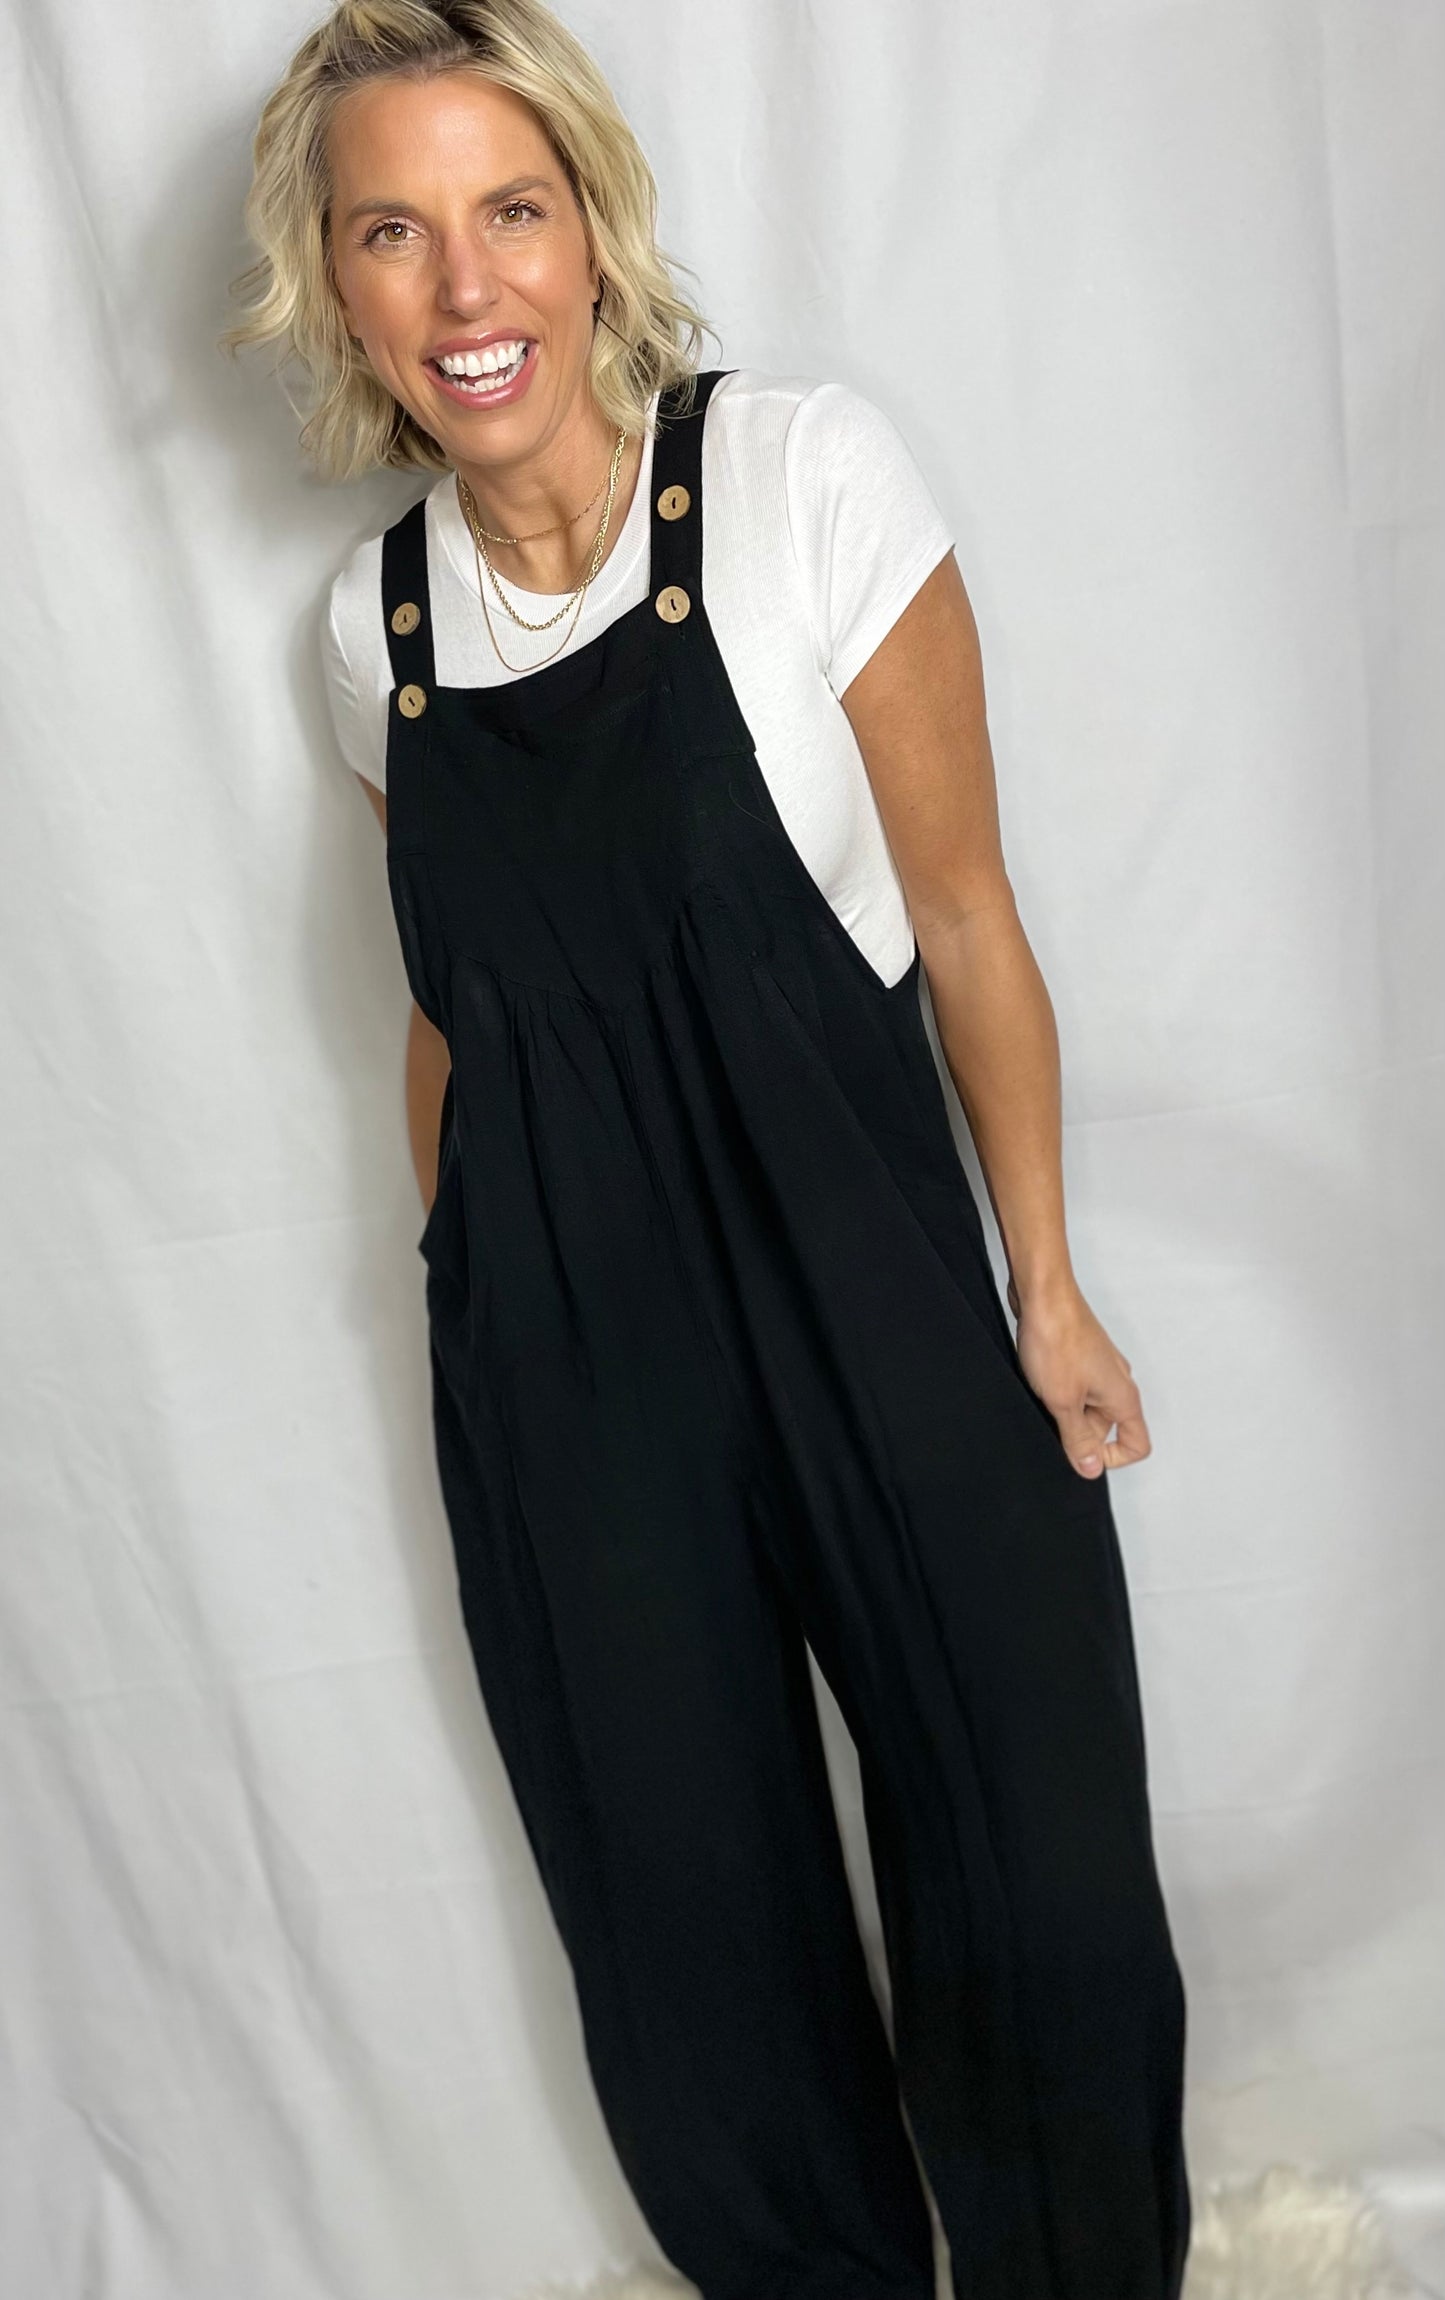 Over the moon overalls